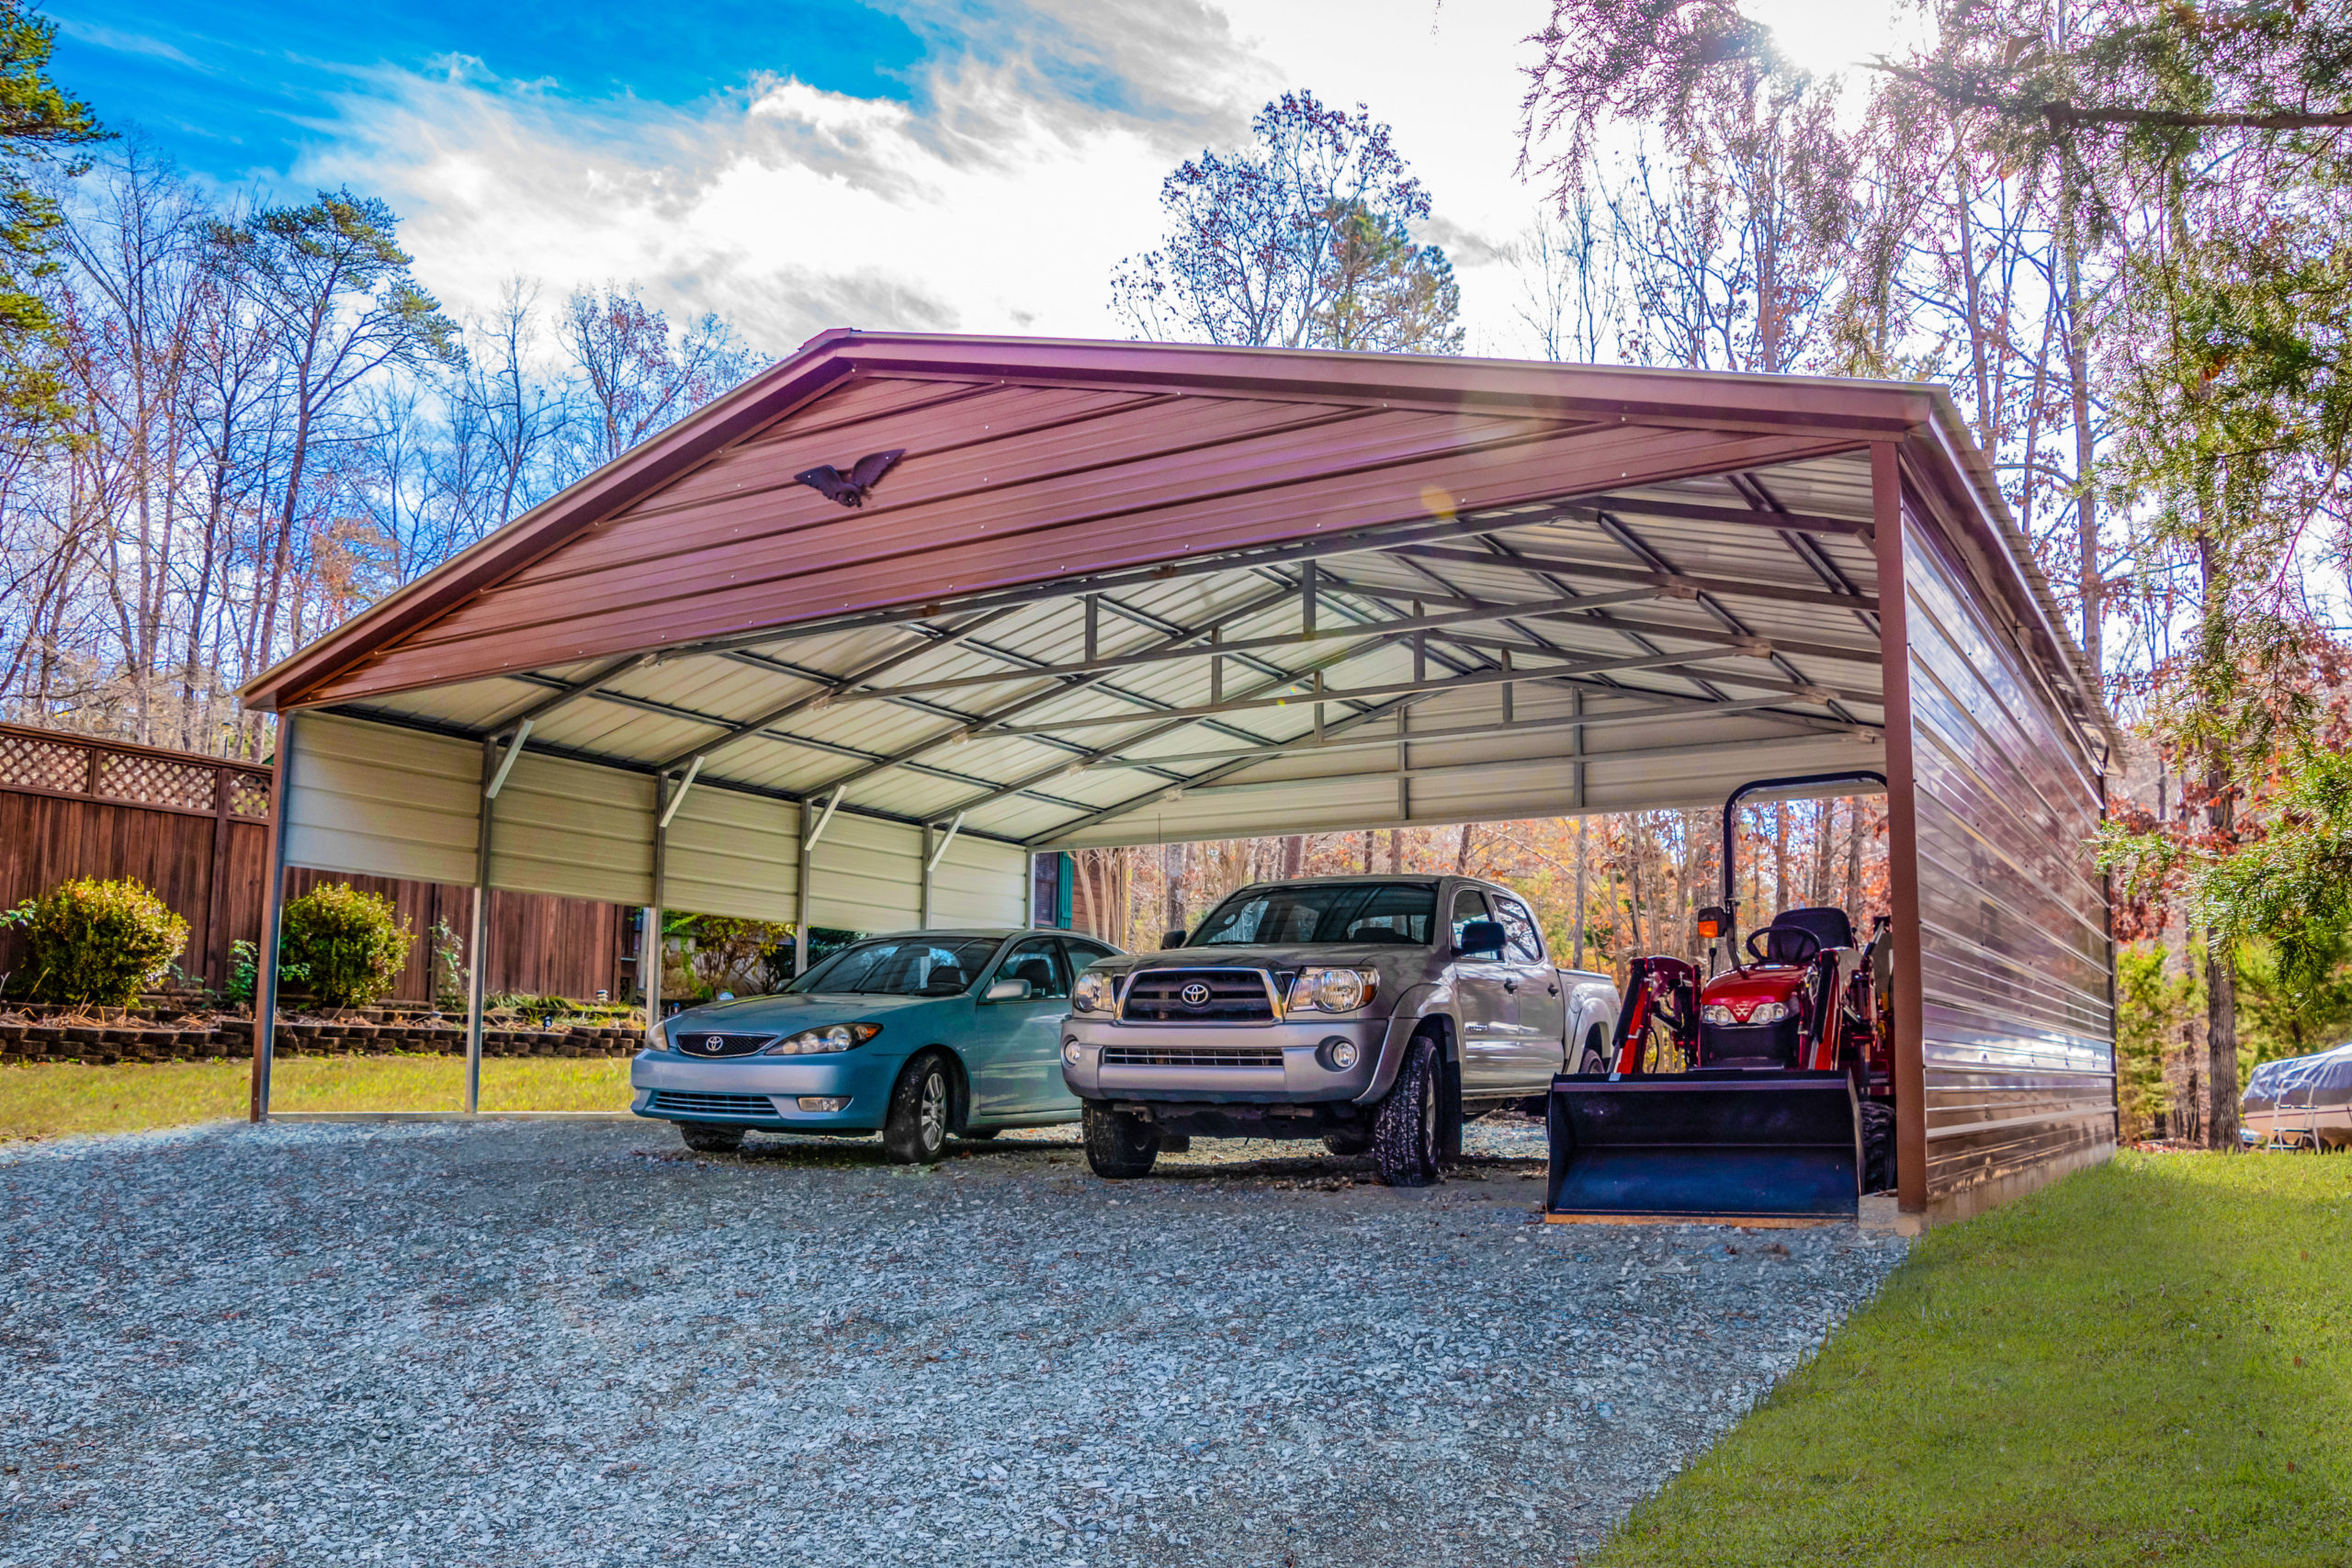 30x25x8 Triple Wide Carport with a Vertical Roof - Village Carports